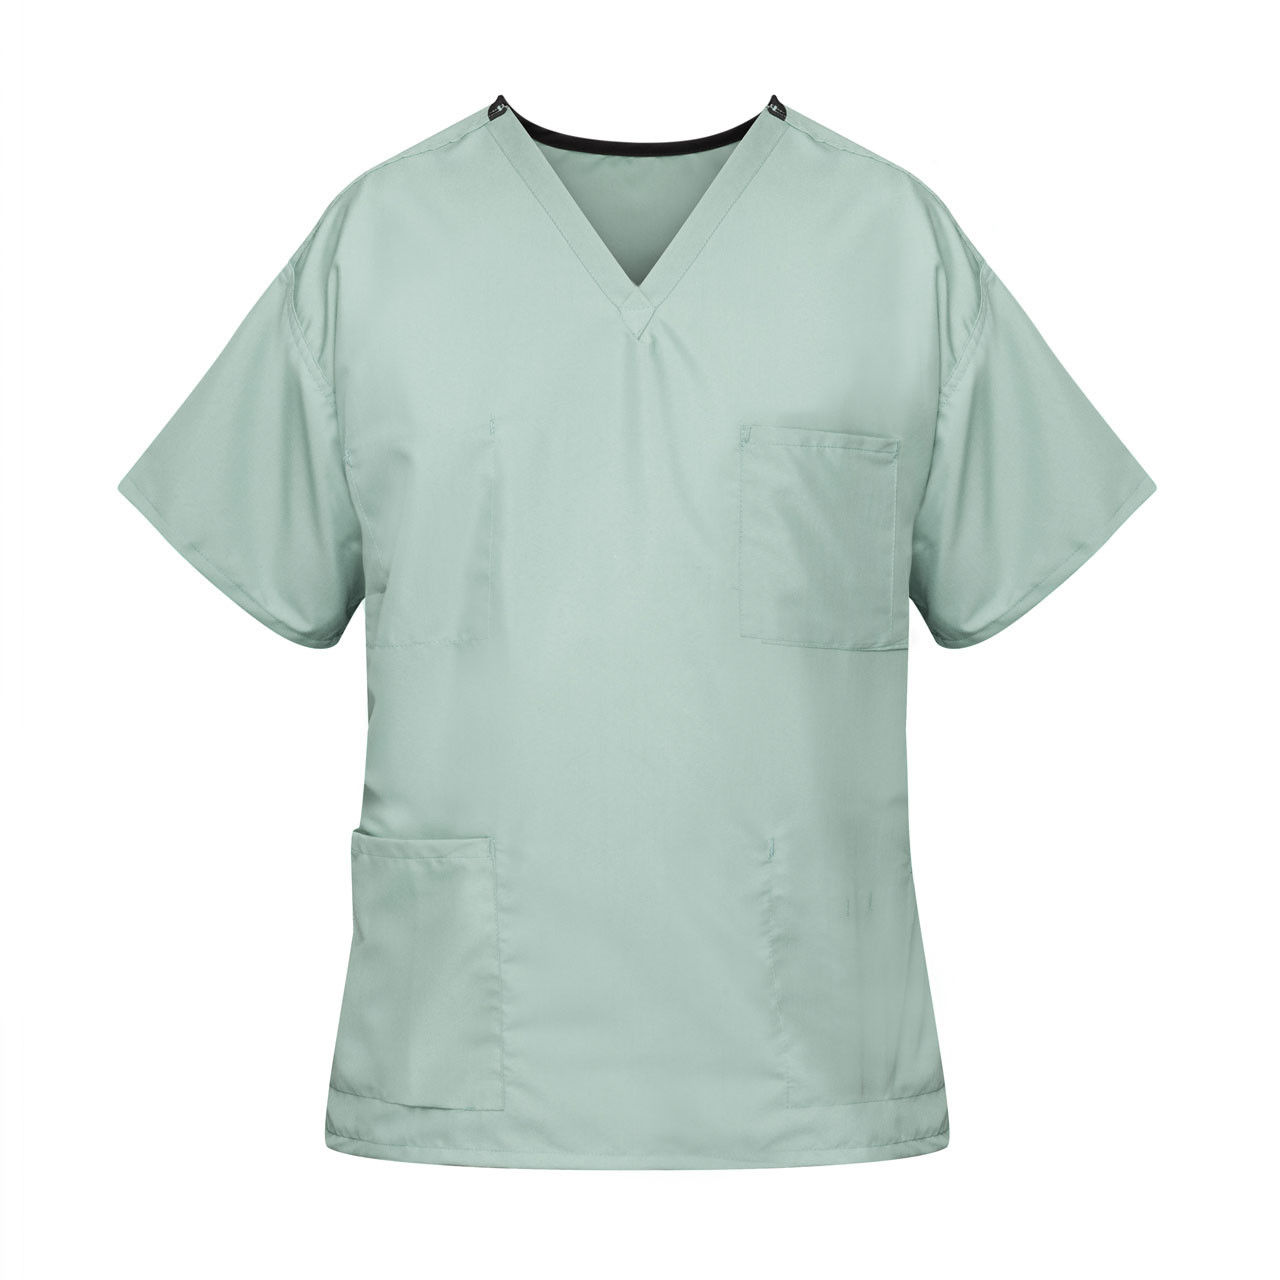 What is the fabric of the misty green scrubs?